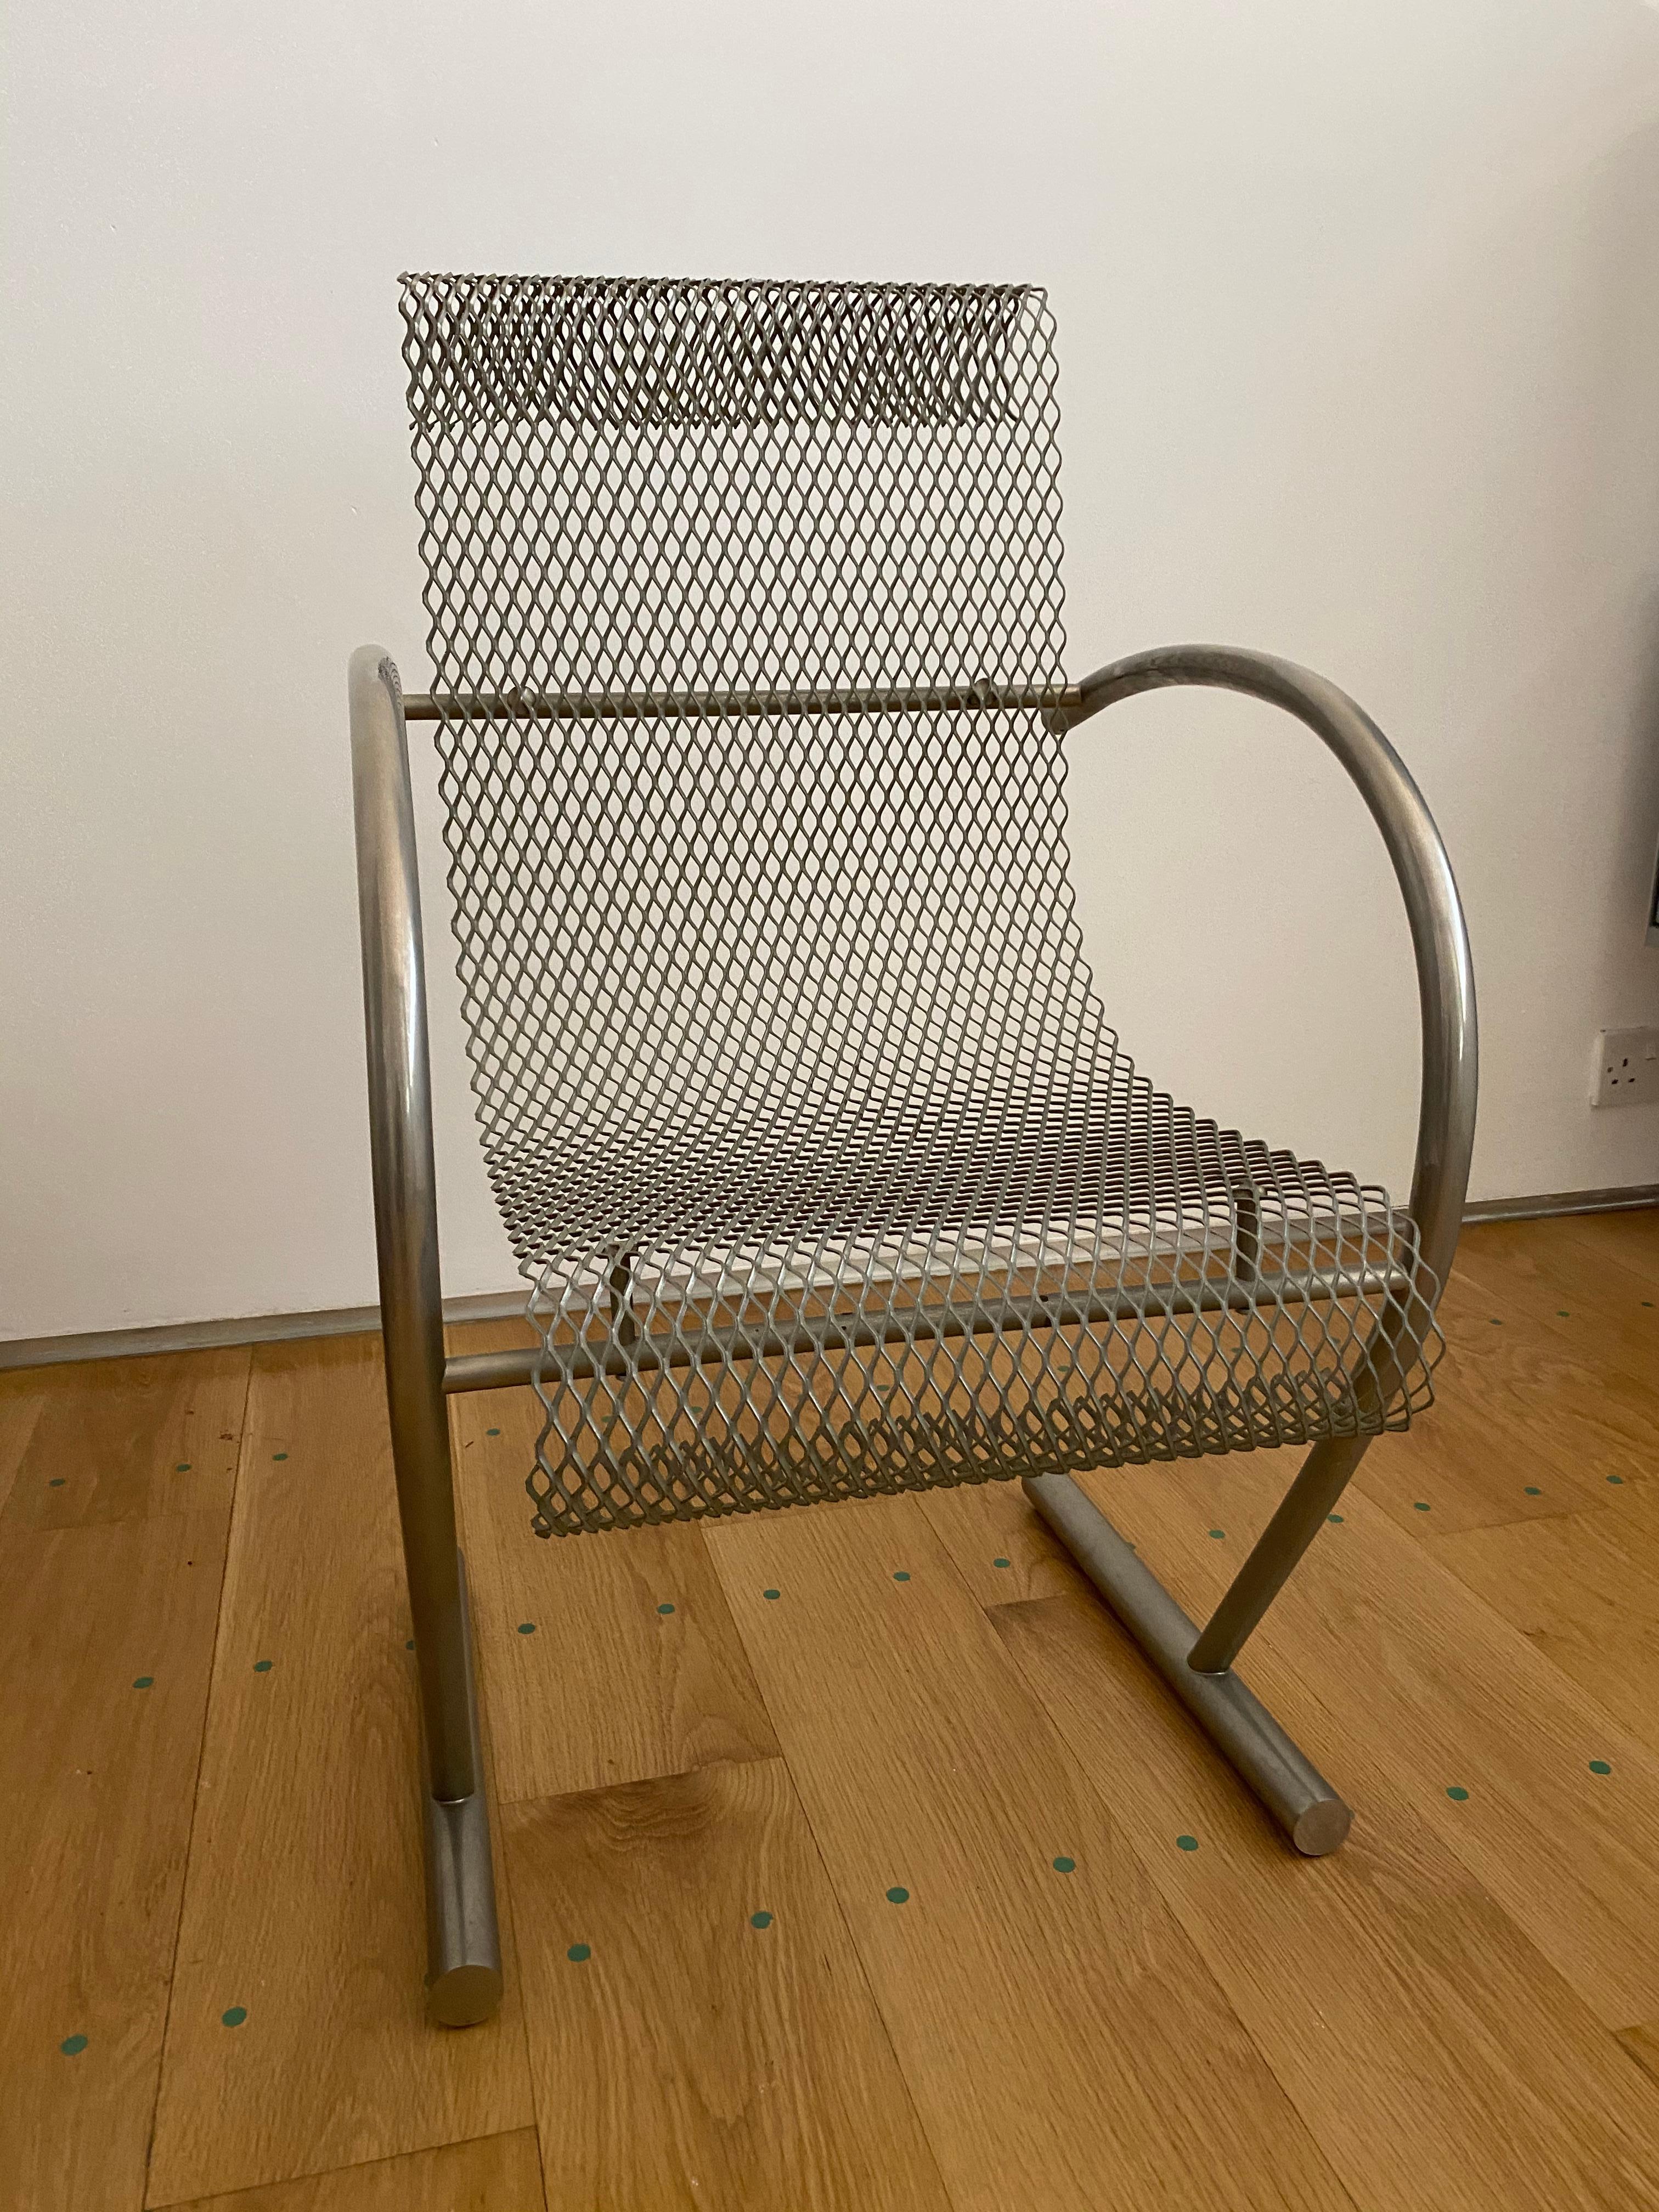 Sing Sing Sing chair designed by Shiro Kuramata in 1985 in France and produced by XO, co-founded by Philippe Starck. Expanded metal, silver-grey coated tubular steel. 

In good original condition. 

Born in Tokyo in 1934, Shiro Kuramata attended